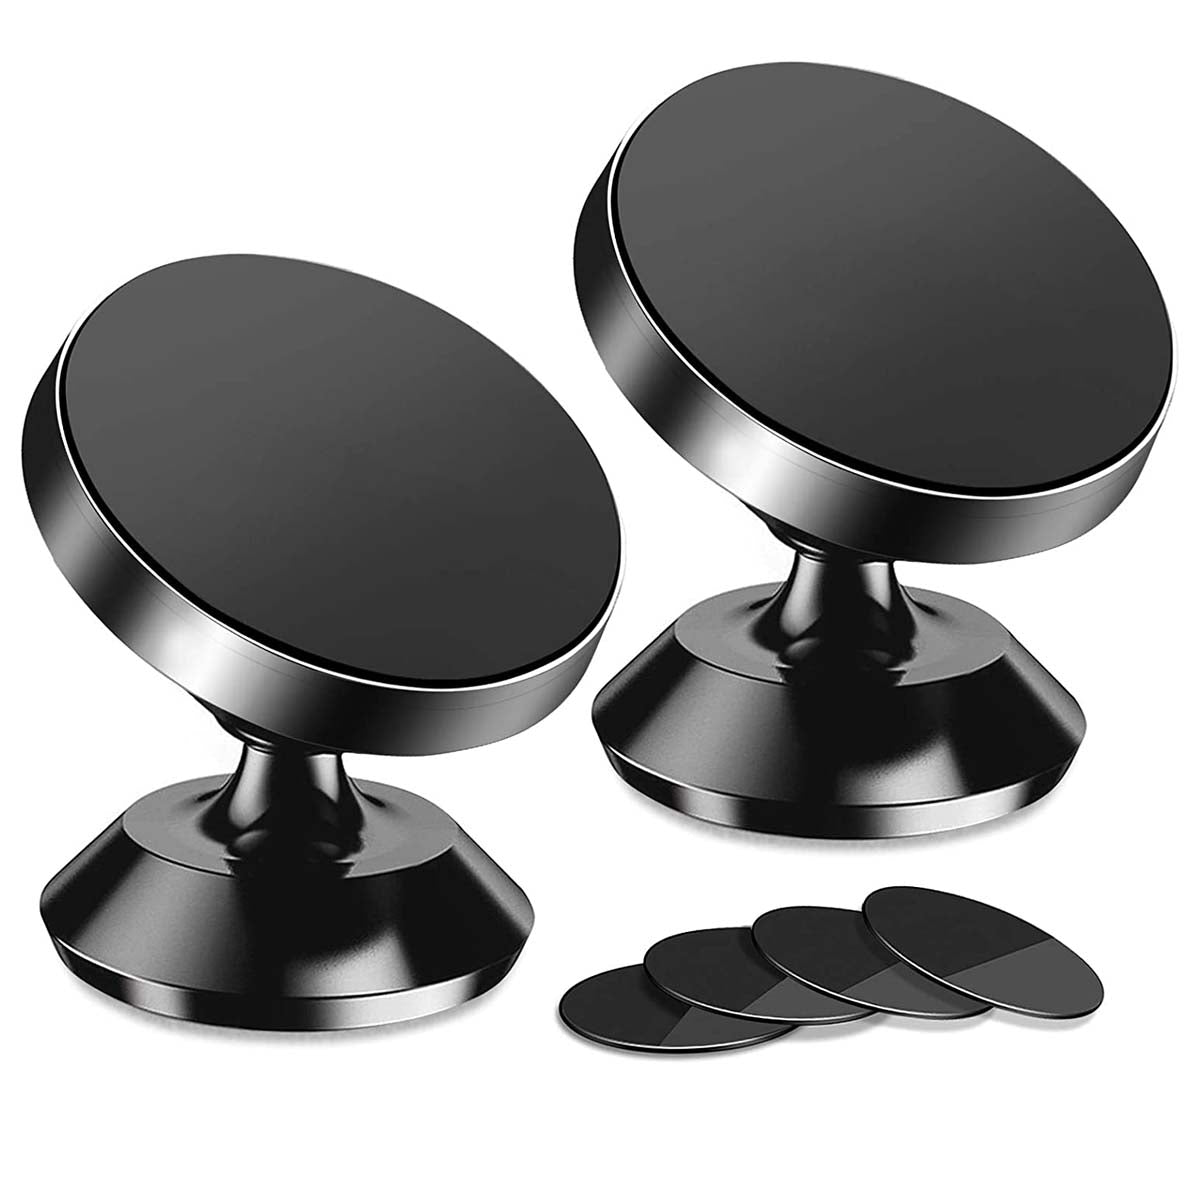 [2 Pack ] Magnetic Phone Mount, Custom For Cars, [ Super Strong Magnet ] [ with 4 Metal Plate ] car Magnetic Phone Holder, [ 360° Rotation ] Universal Dashboard car Mount Fits All Cell Phones, Car Accessories IN13982